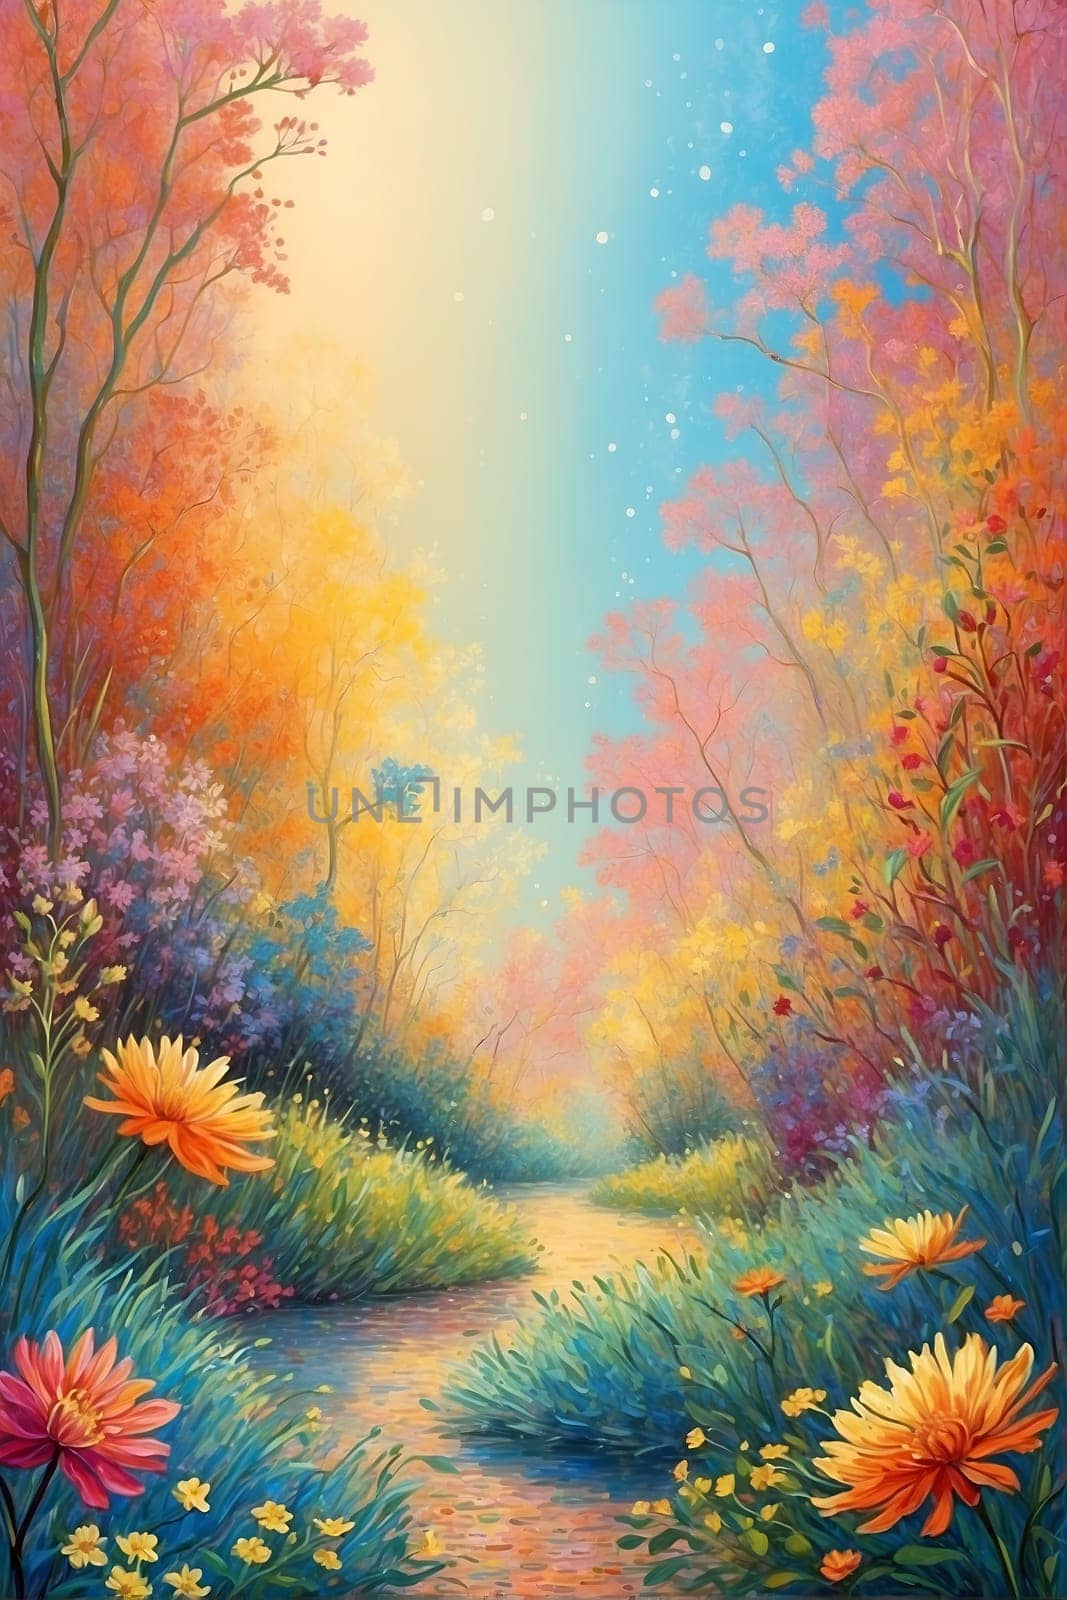 This photo features a vibrant painting of a forest abundant with colorful flowers.